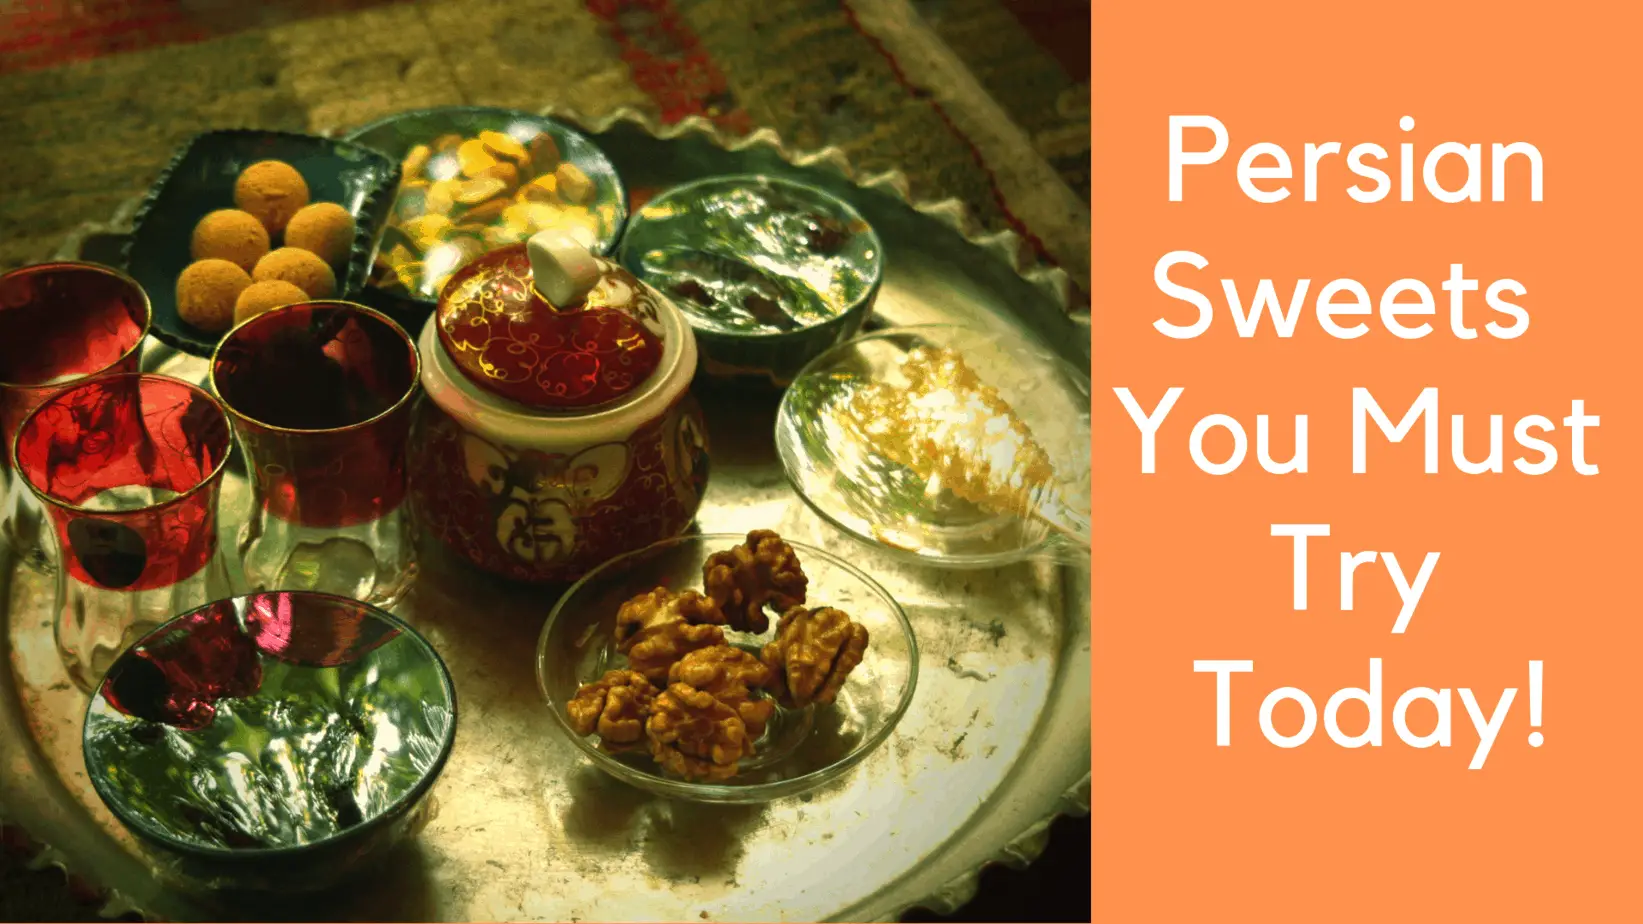 Best Persian Sweets you must try today